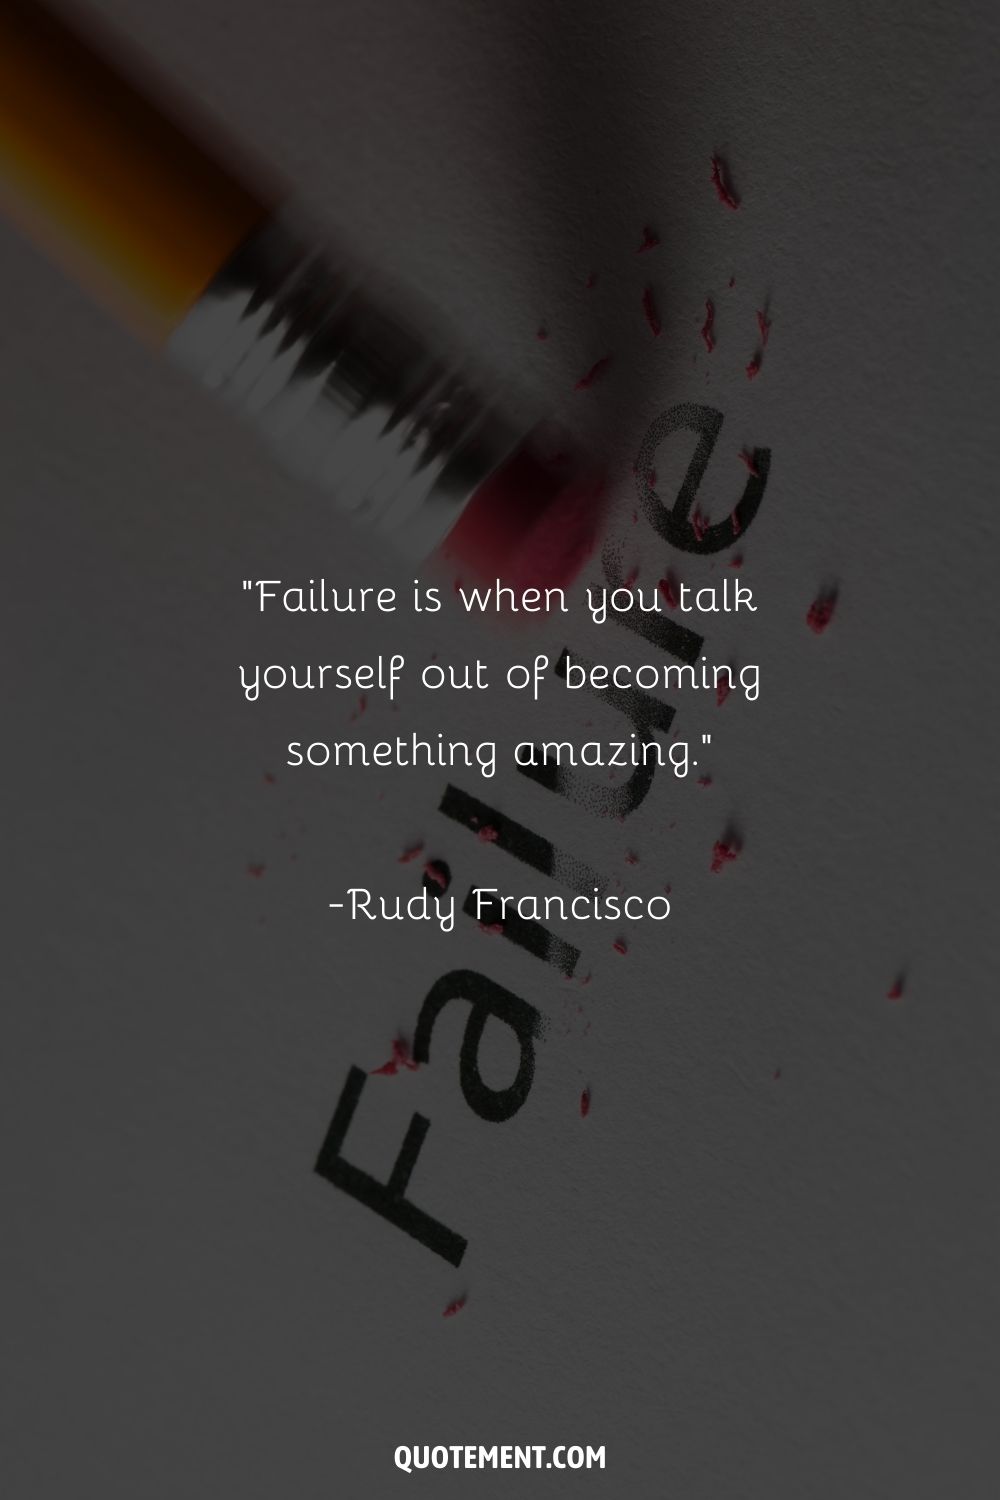 “Failure is when you talk yourself out of becoming something amazing.” ― Rudy Francisco